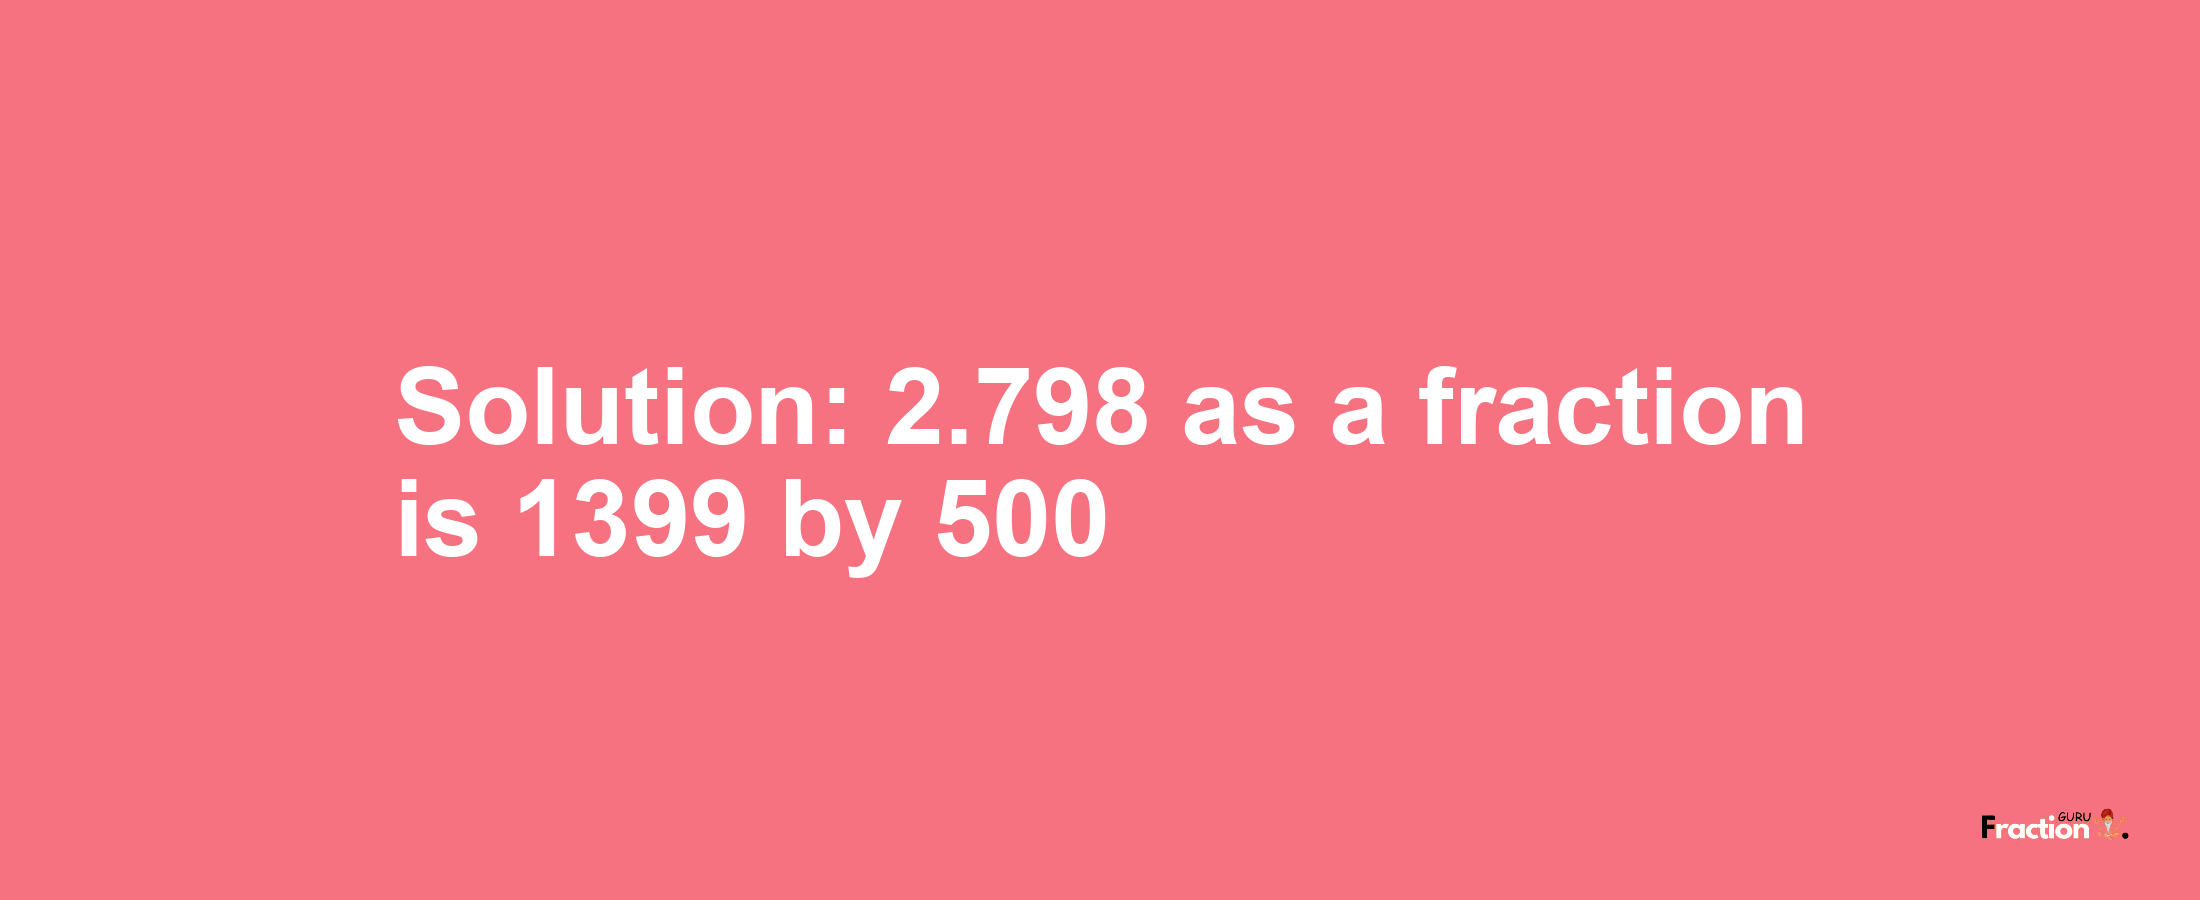 Solution:2.798 as a fraction is 1399/500